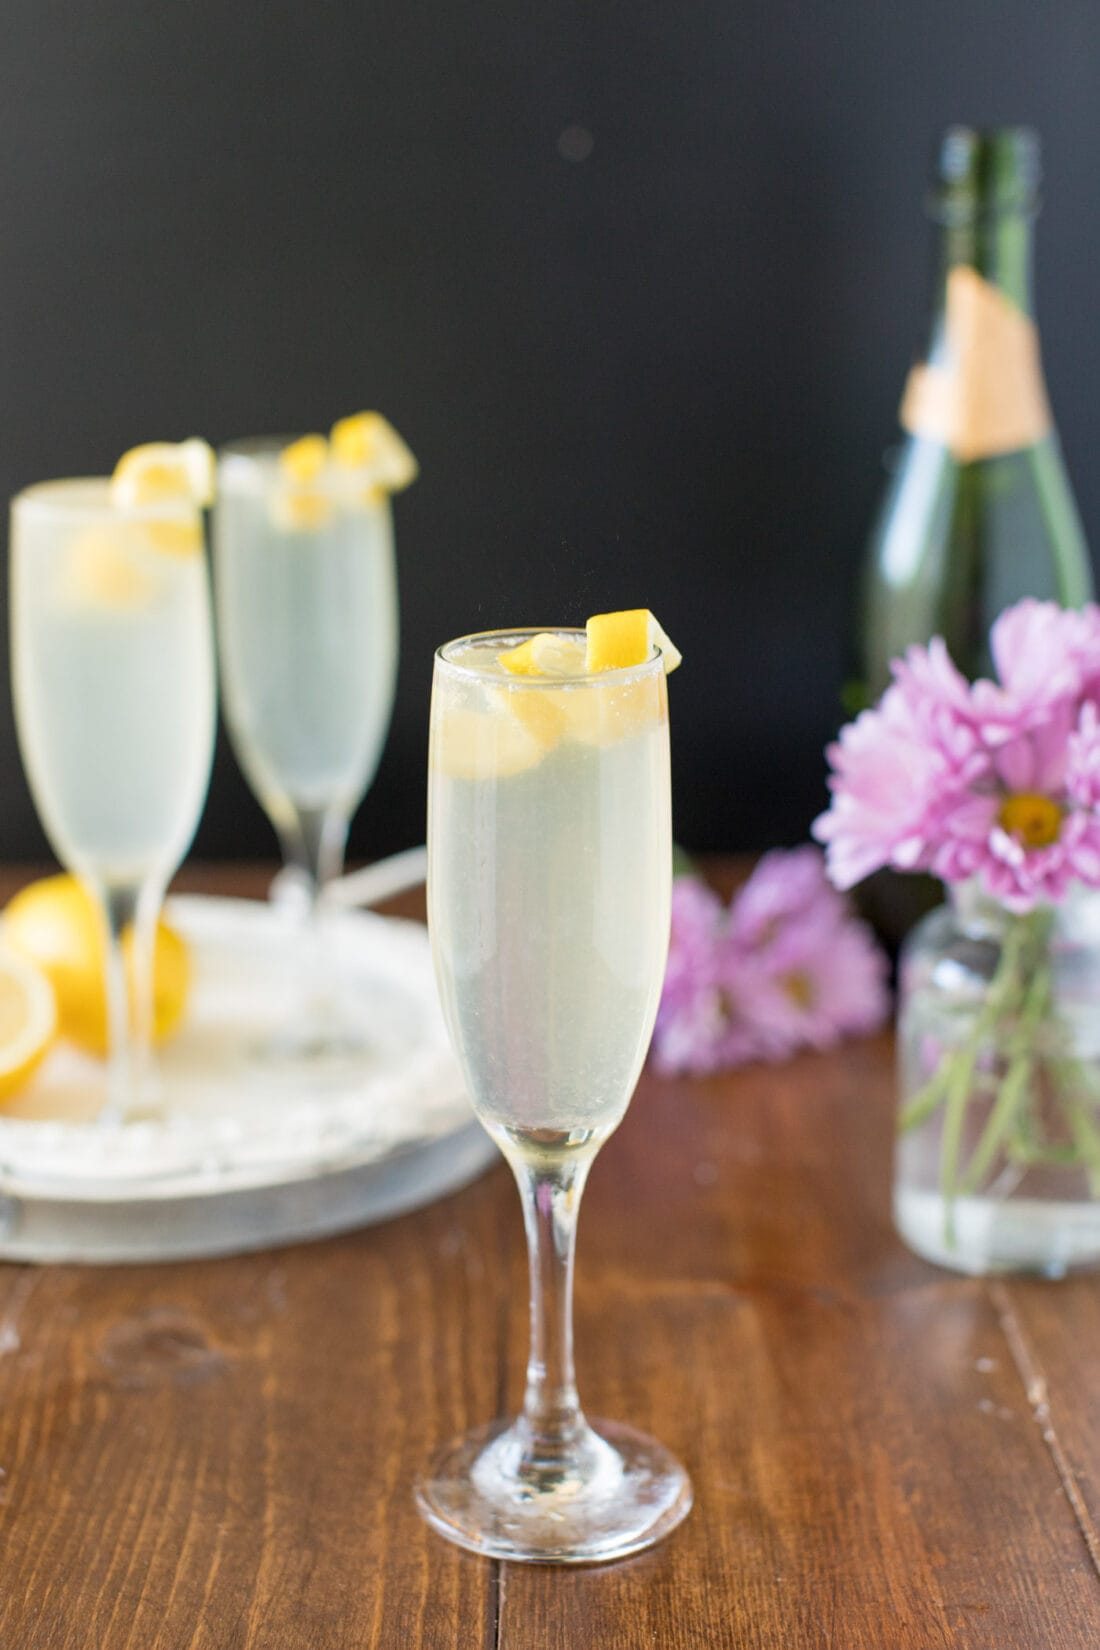 A French 75 garnished with a lemon twist